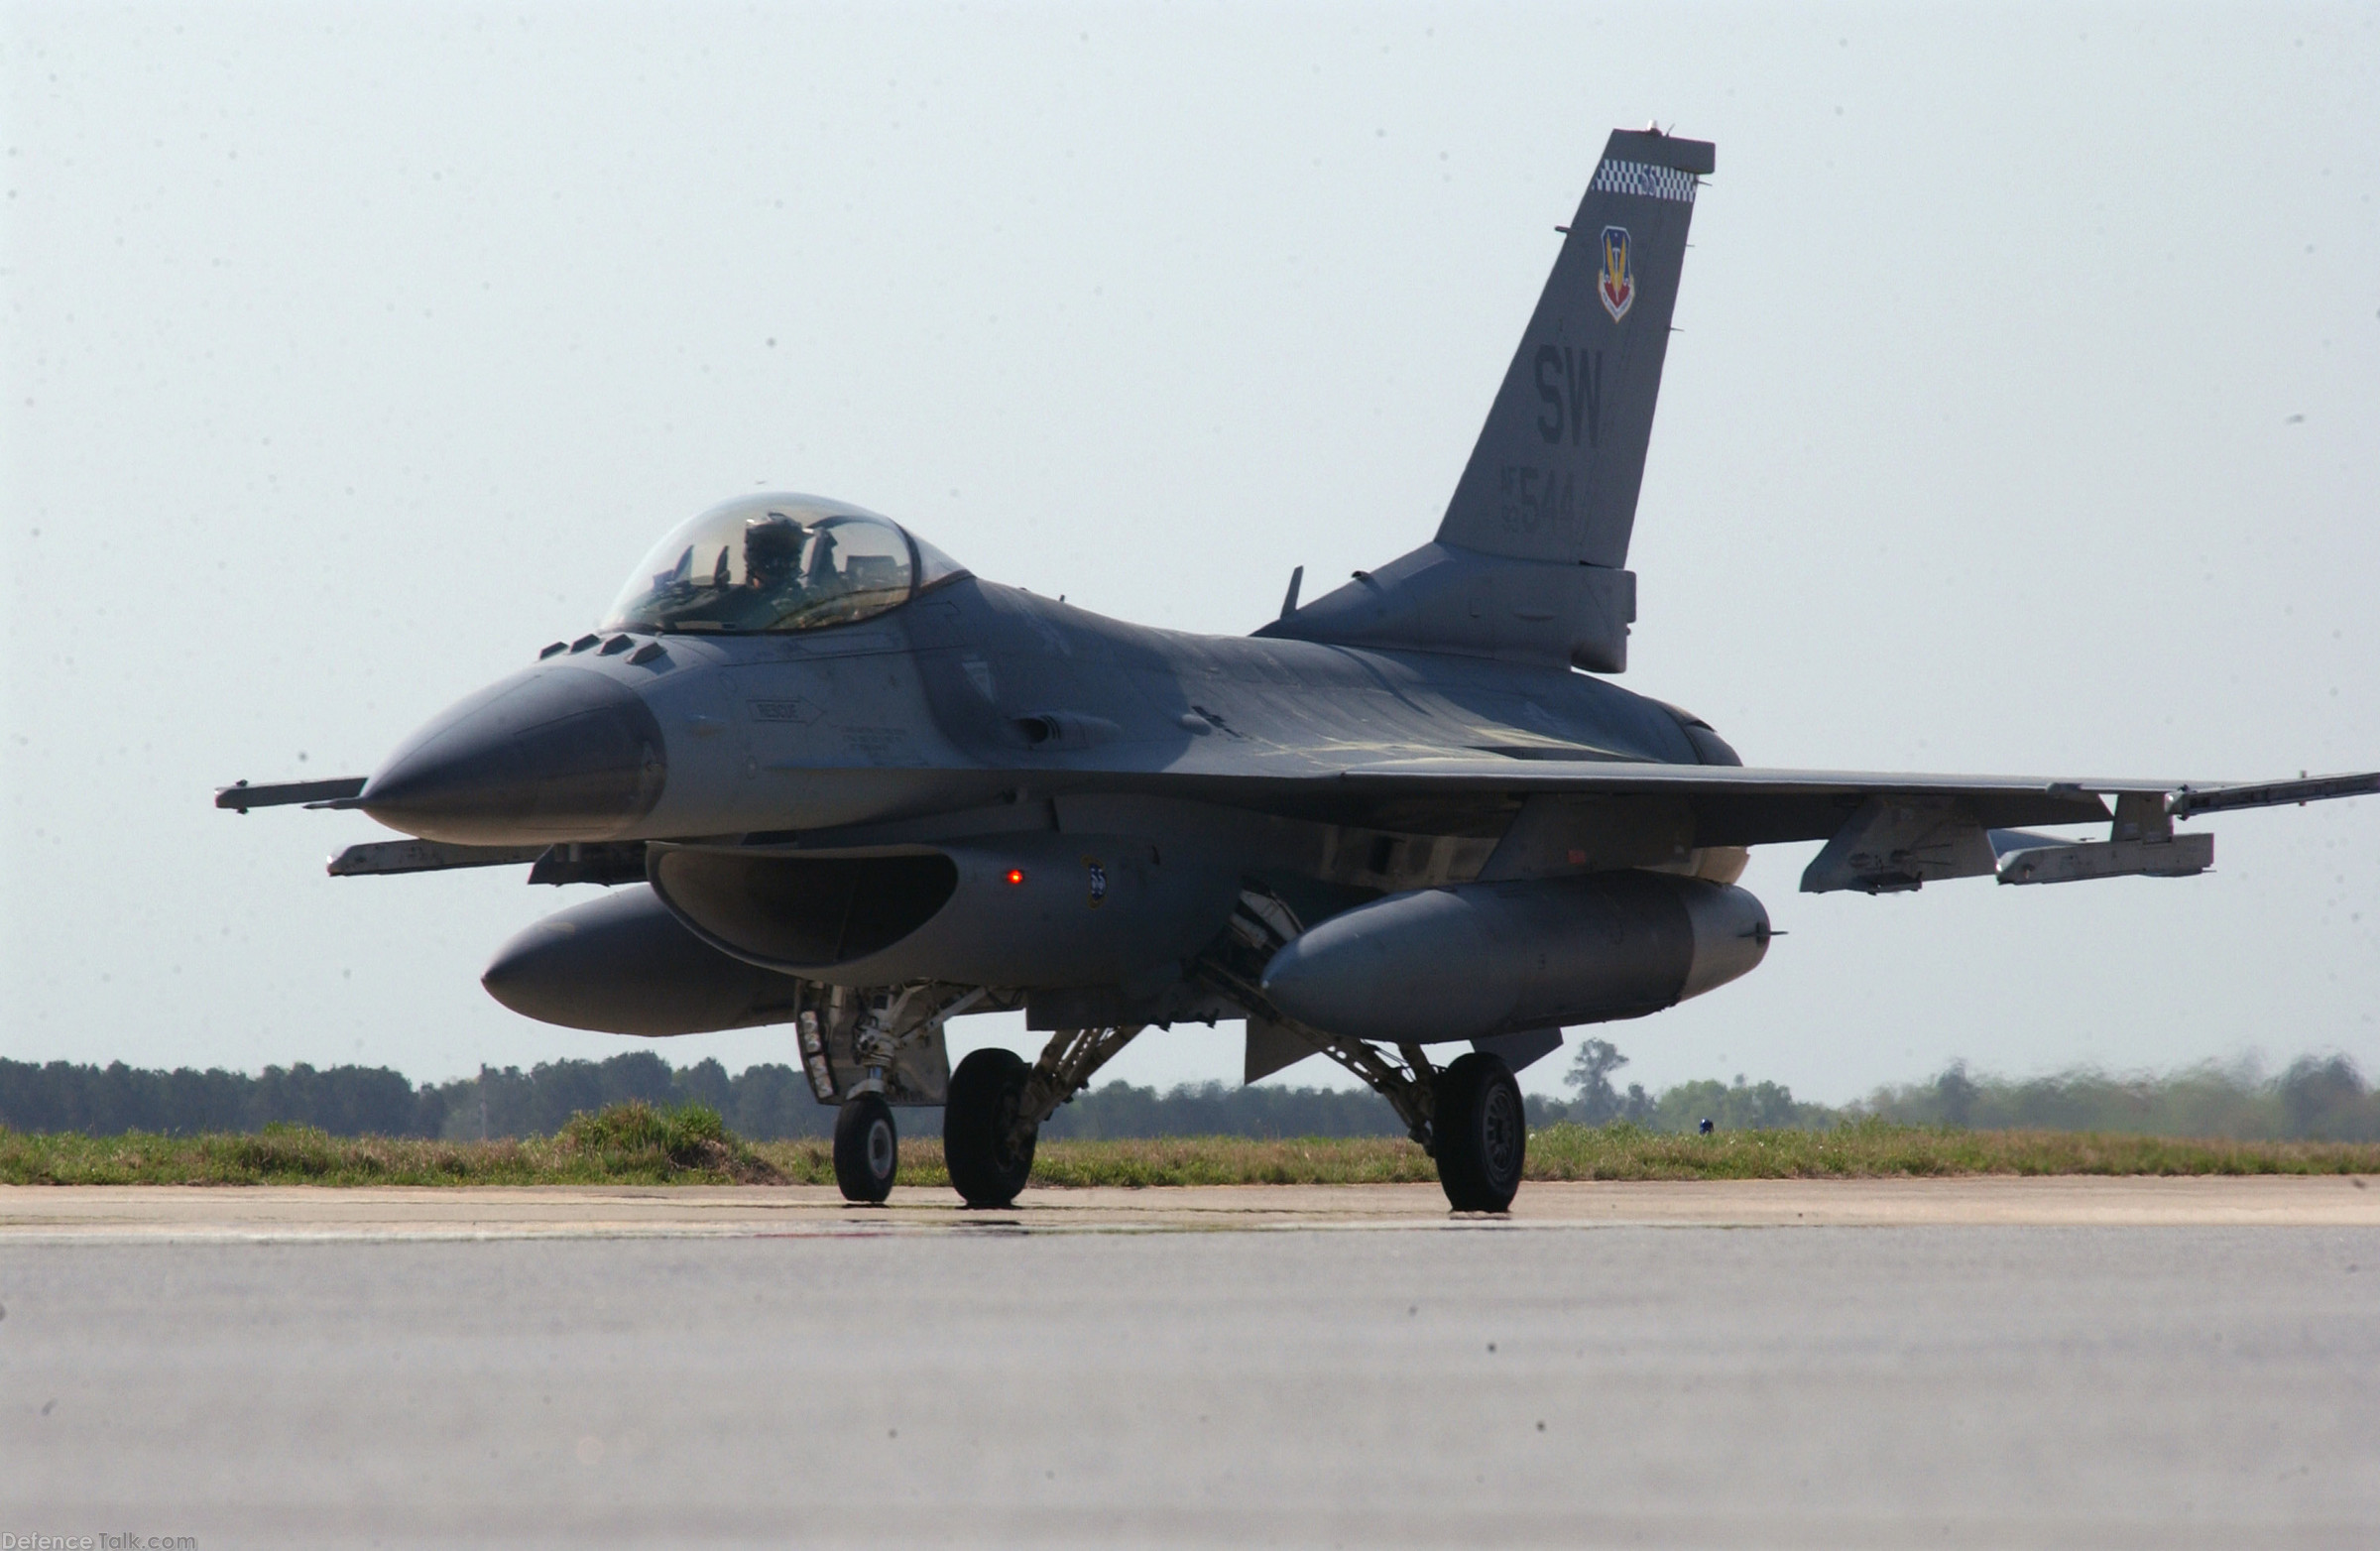 F-16 Fighter Aircraft - US Air Force